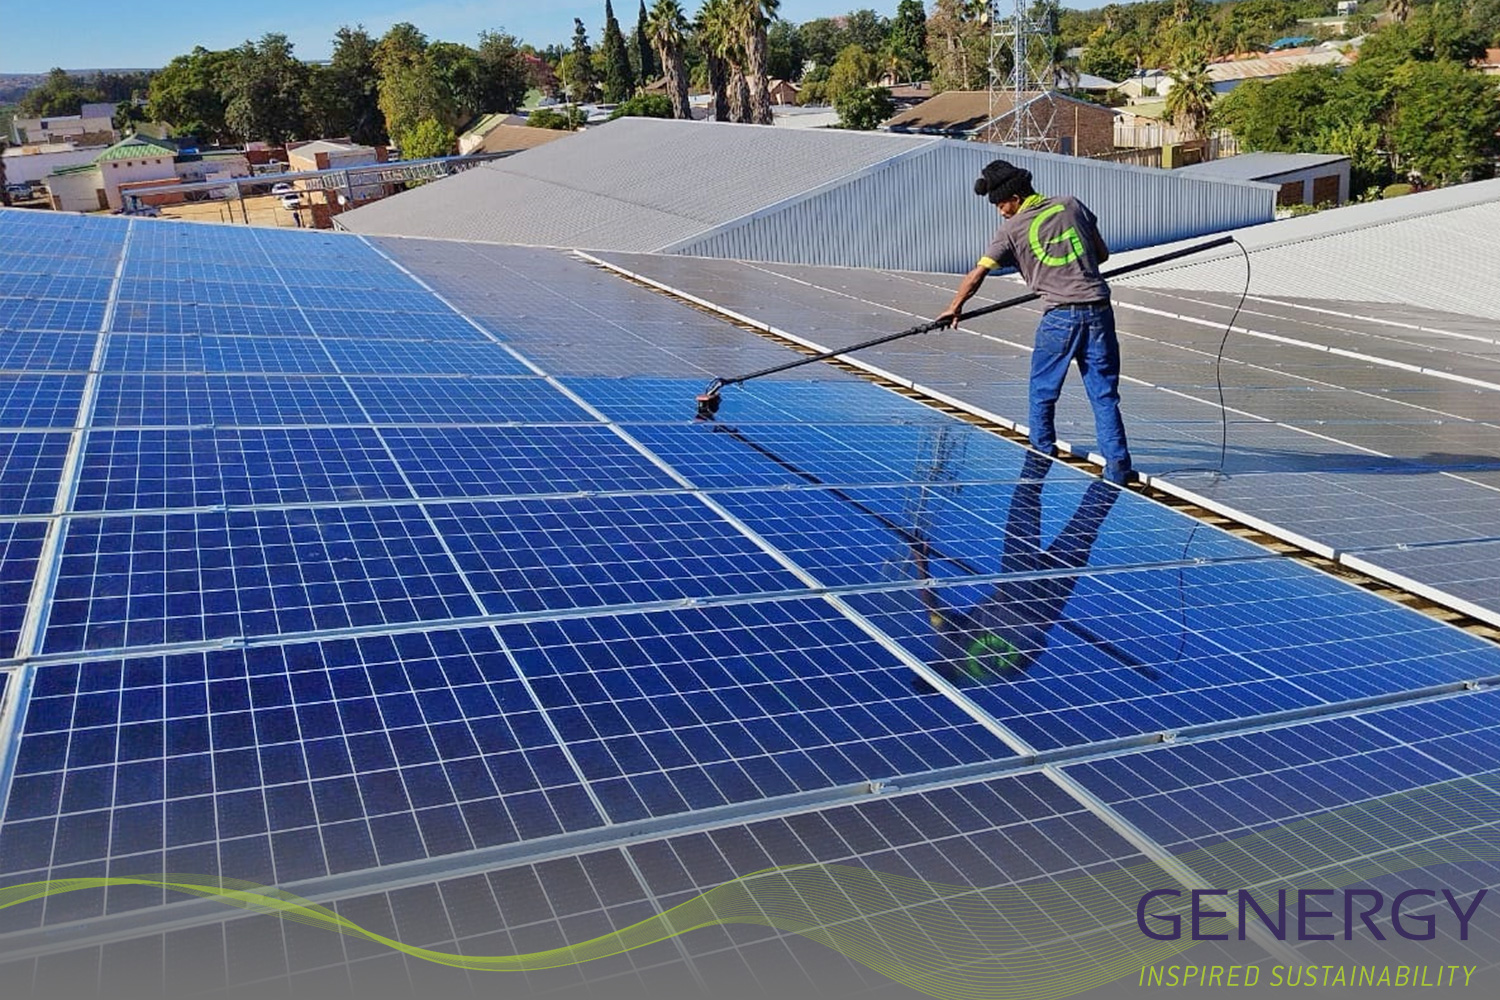 Man washing solar panels on rooftop with writing: GENERGY Inspired sustainability and green lines at bottom of image